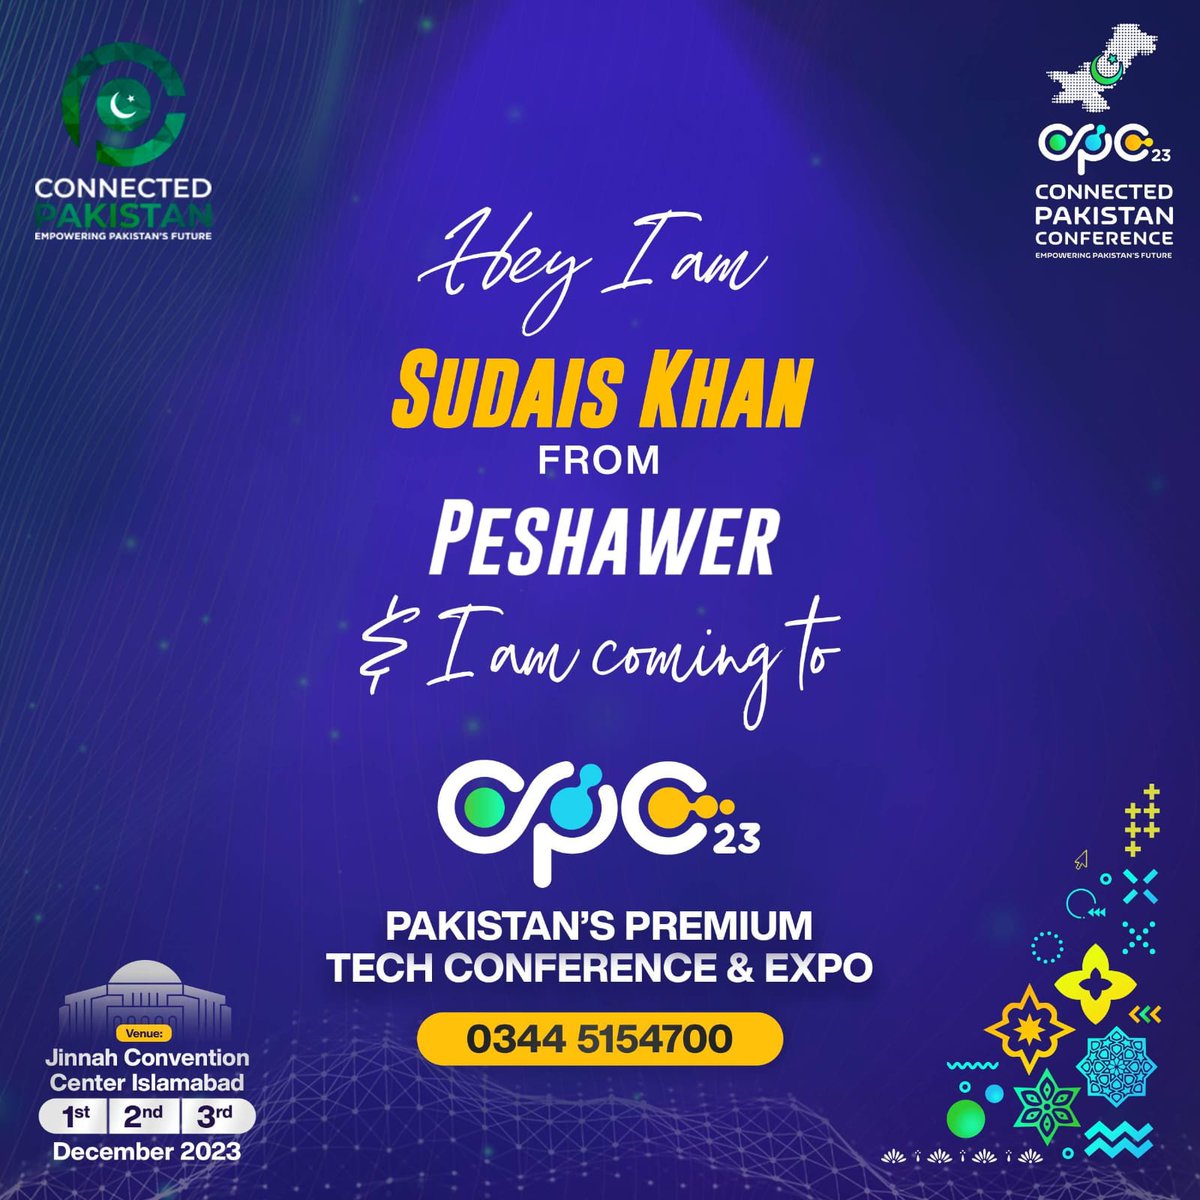 CPC Event is just around the corner and I will really appreciate if someone from #Peshawer is willing to join me. This is going to be an amazing experience as almost all freelancing pioneers are going to join us from round the country.🇵🇰
#CPC #ConnectedPakistan
#WritingCommunity